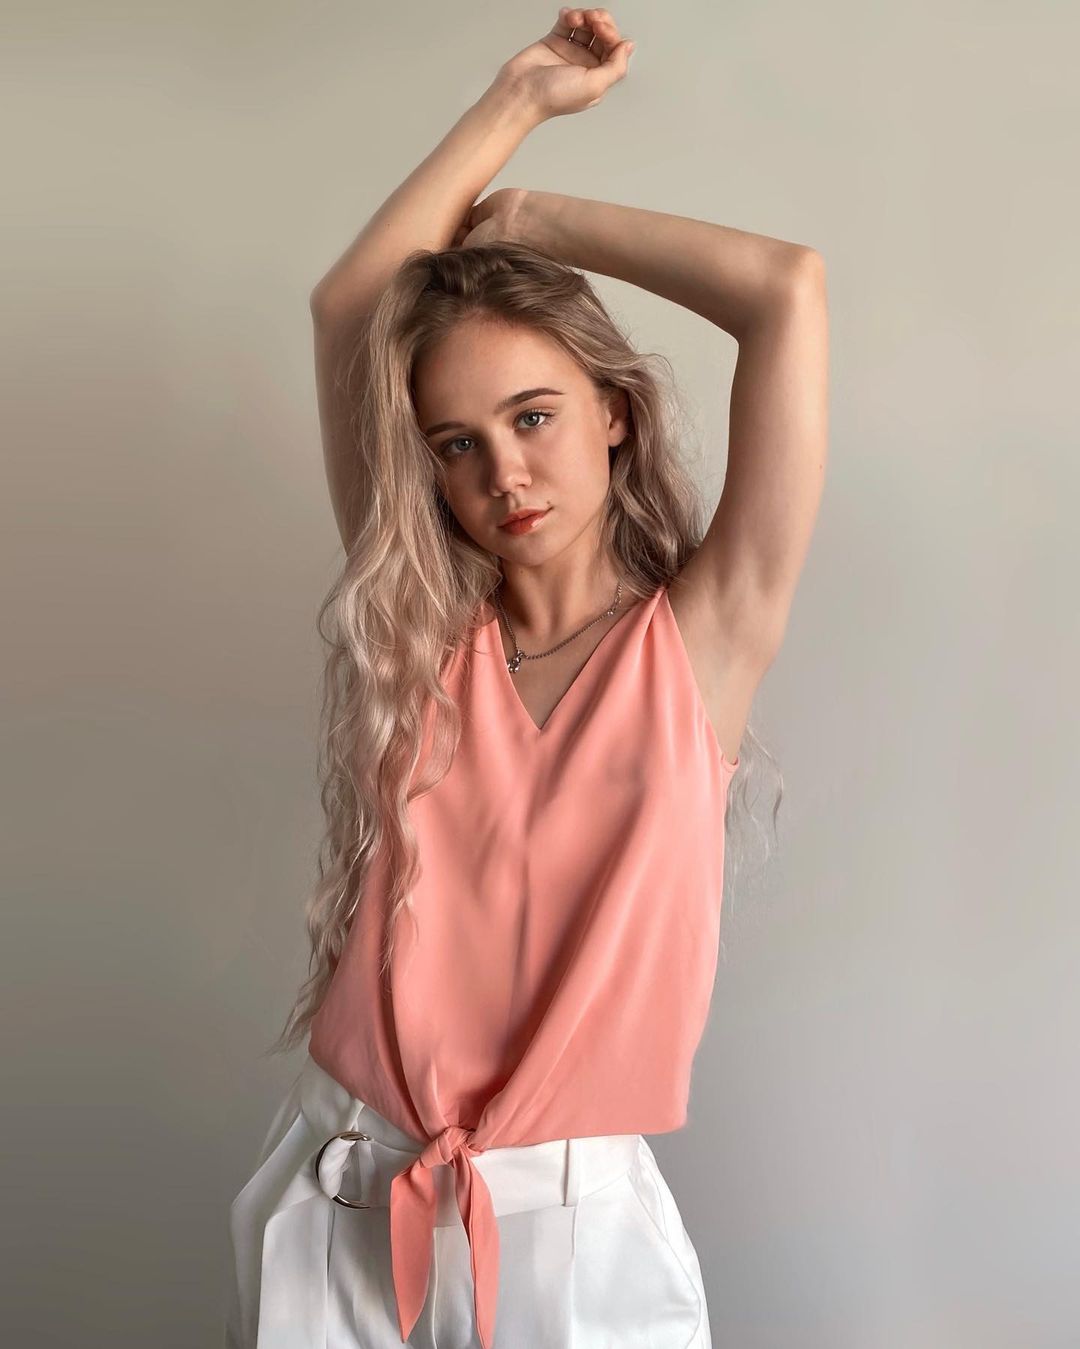 Alisa Goldfinch Photoshoot in Peach Color Top and White Bottom, January 2022